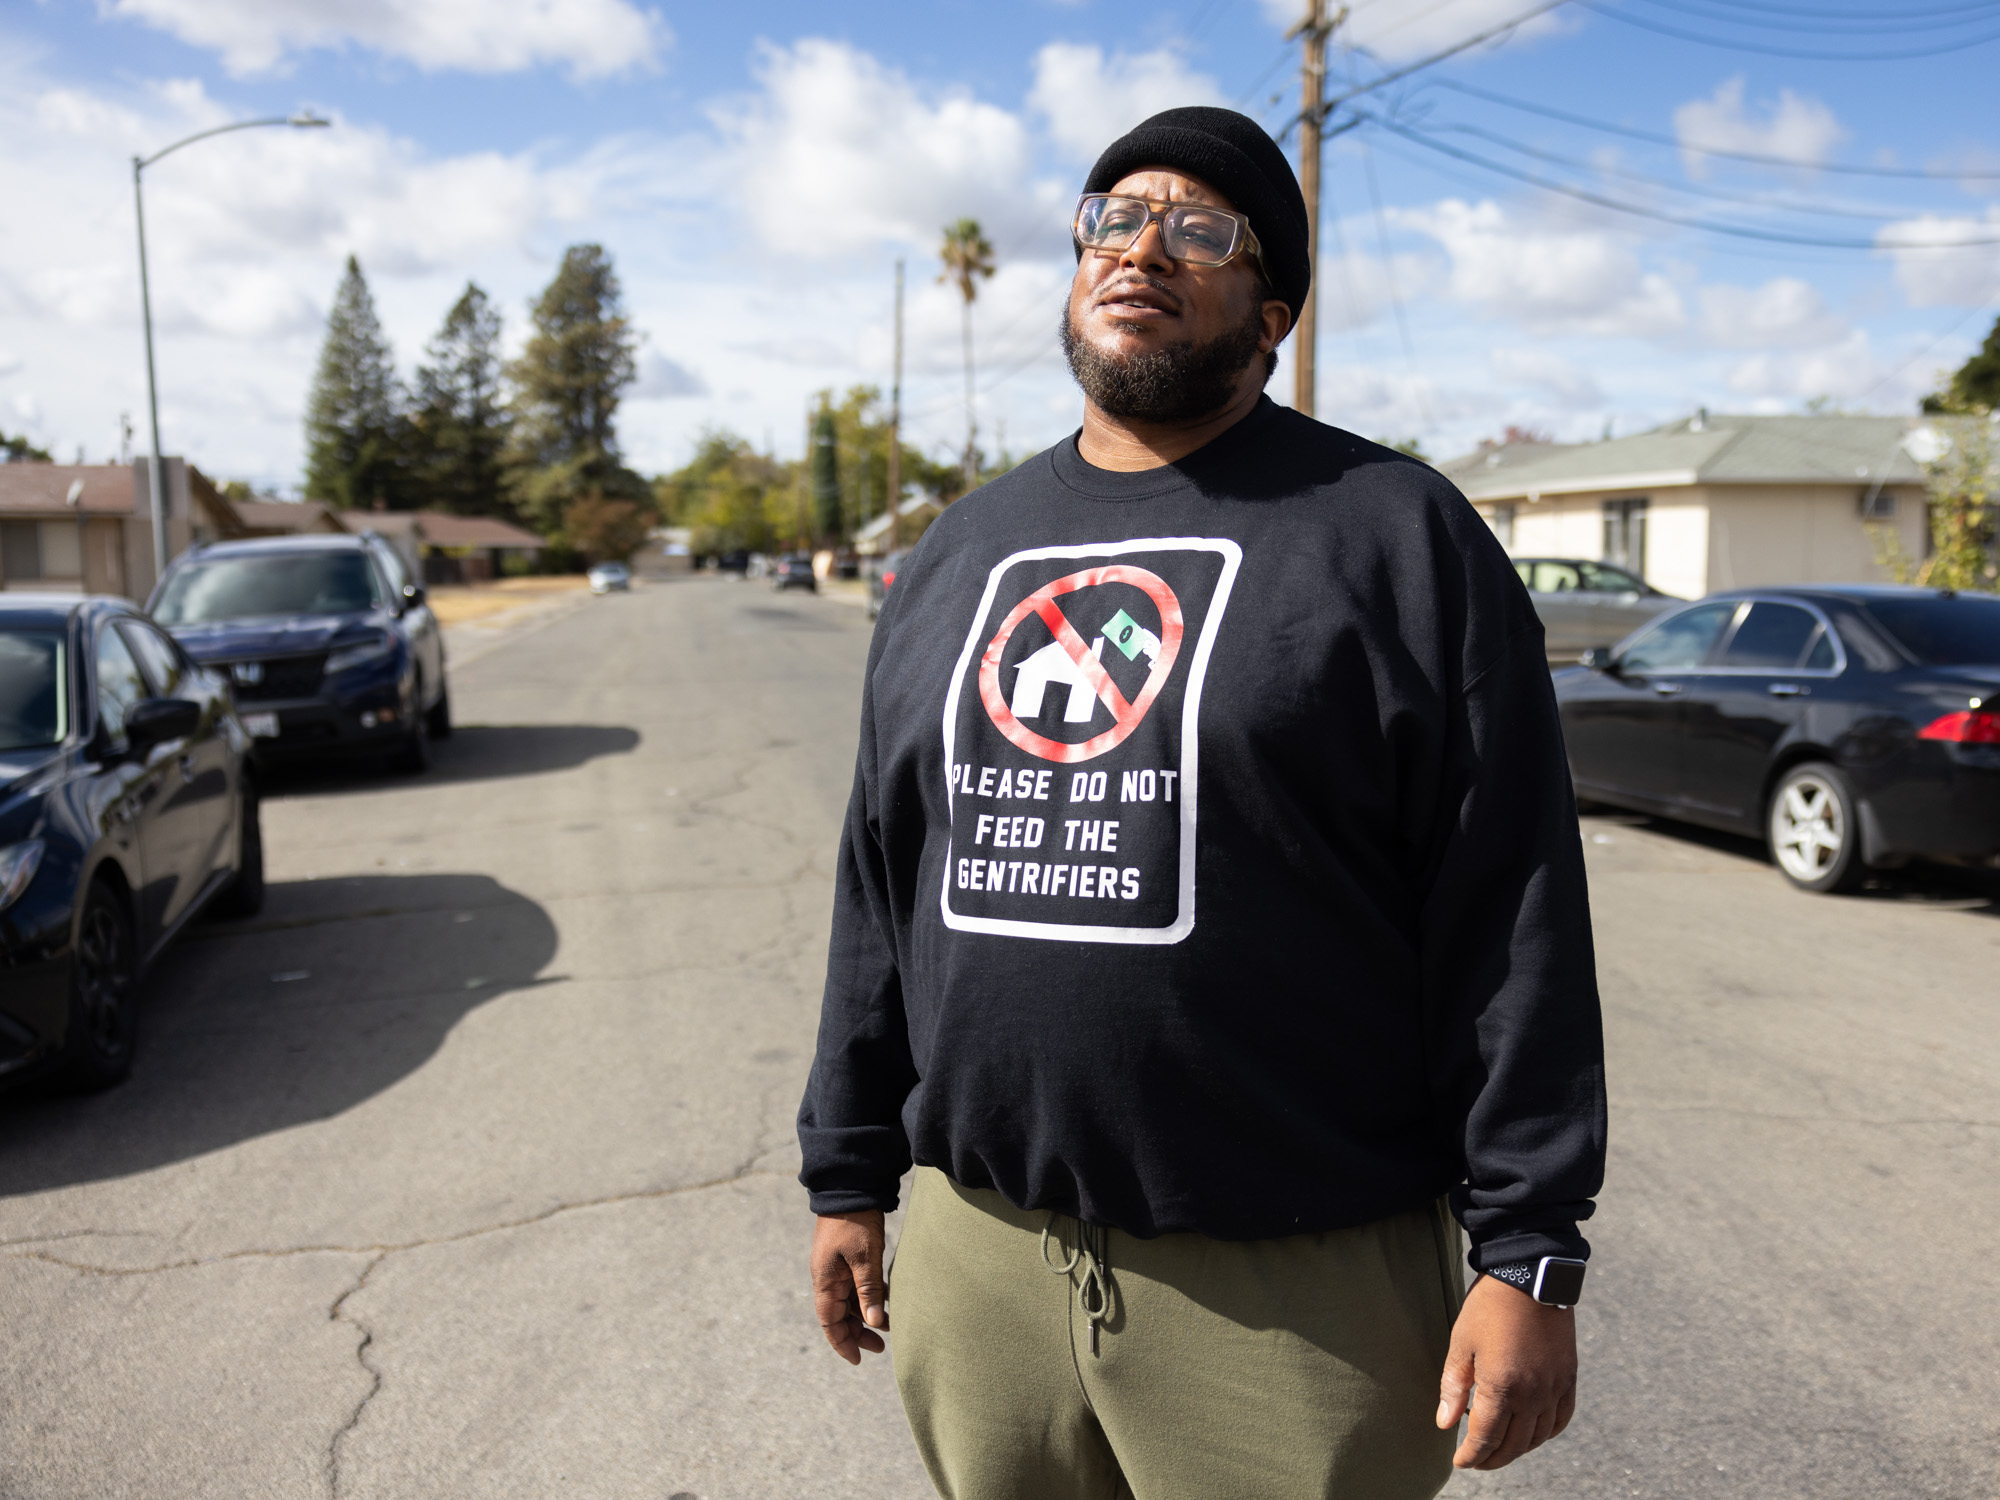 Taking Down Human Trafficking Historically Black Oak Park is Losing Black Residents Sacramento Black Chamber of Commerces First HQ Remembering Farm-to-Fork Pioneer Suzanne Peabody Ashworth image pic